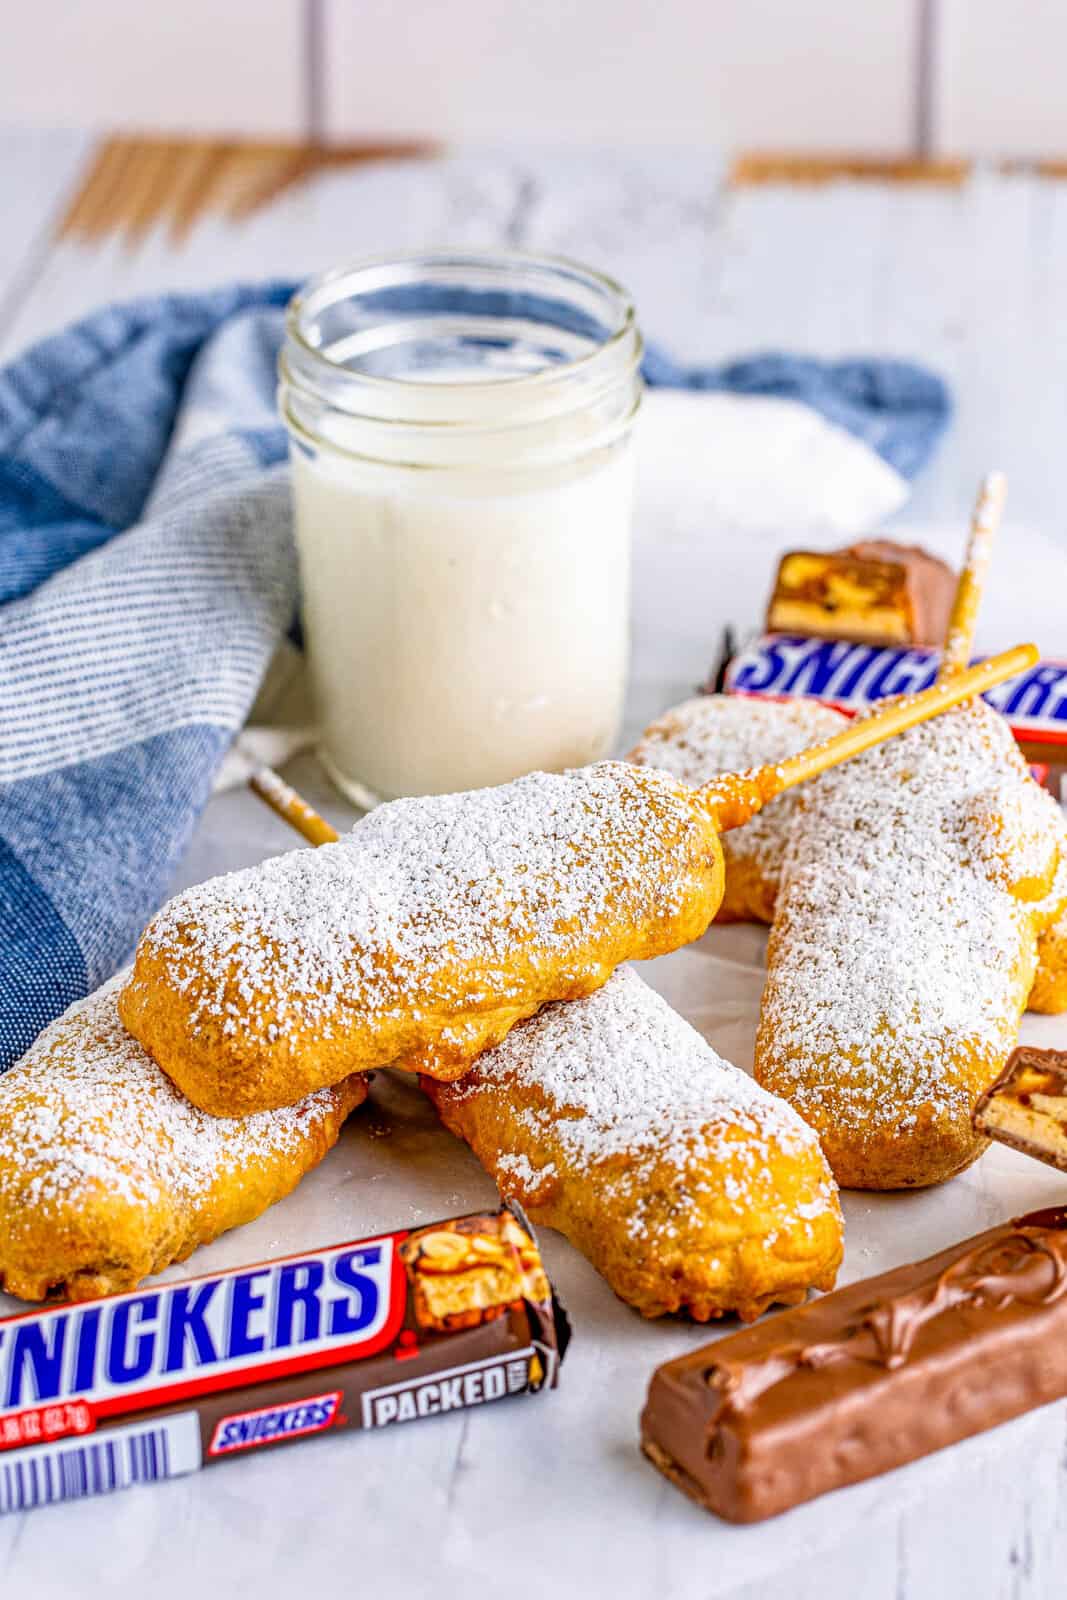 Stacked Deep Fried Snickers on parchment paper covered in powdered sugar with milk and snickers bars.